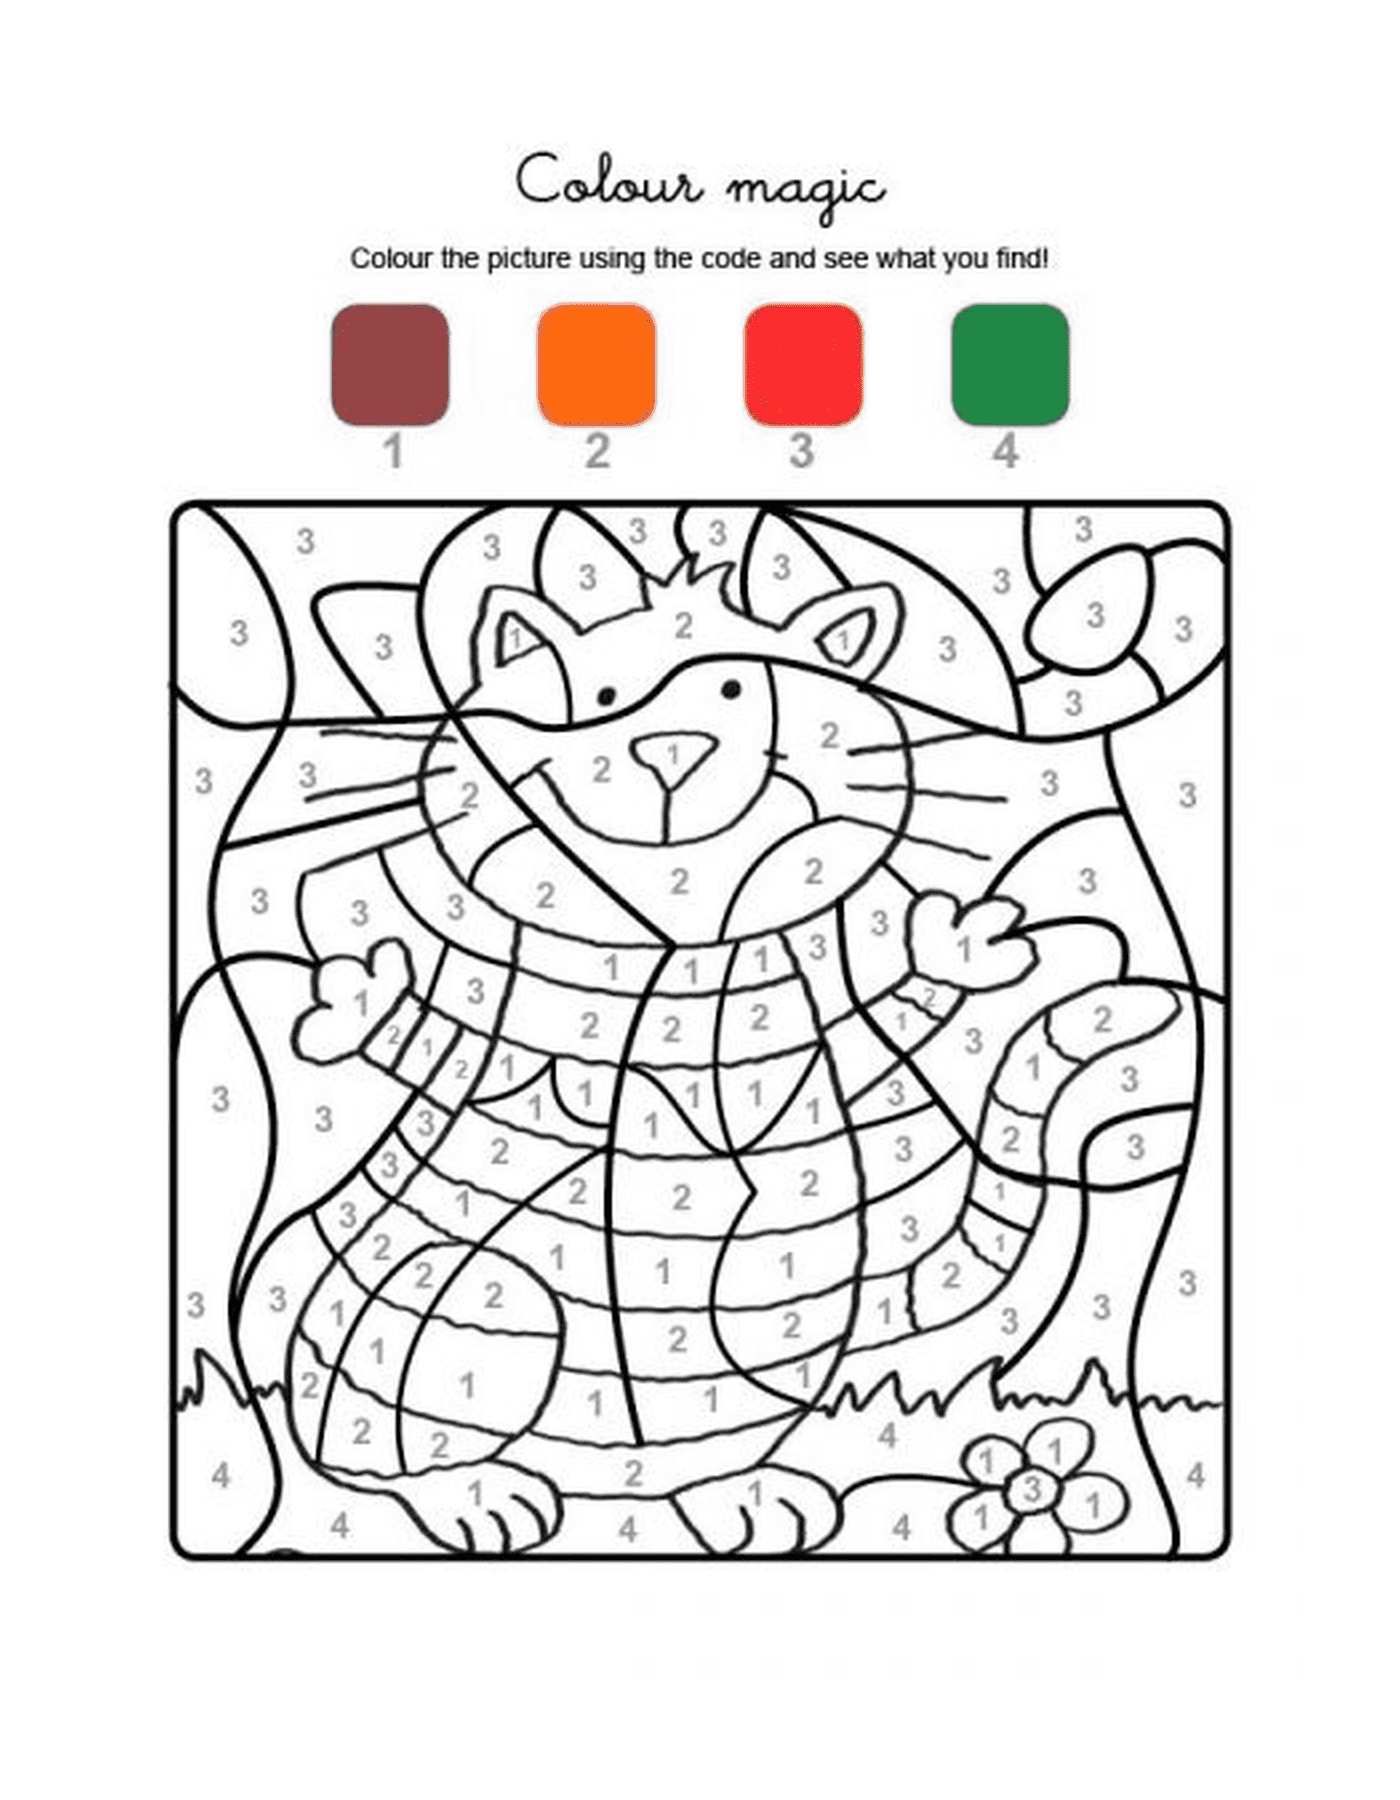  A magic coloring sheet of a cat in the grass 